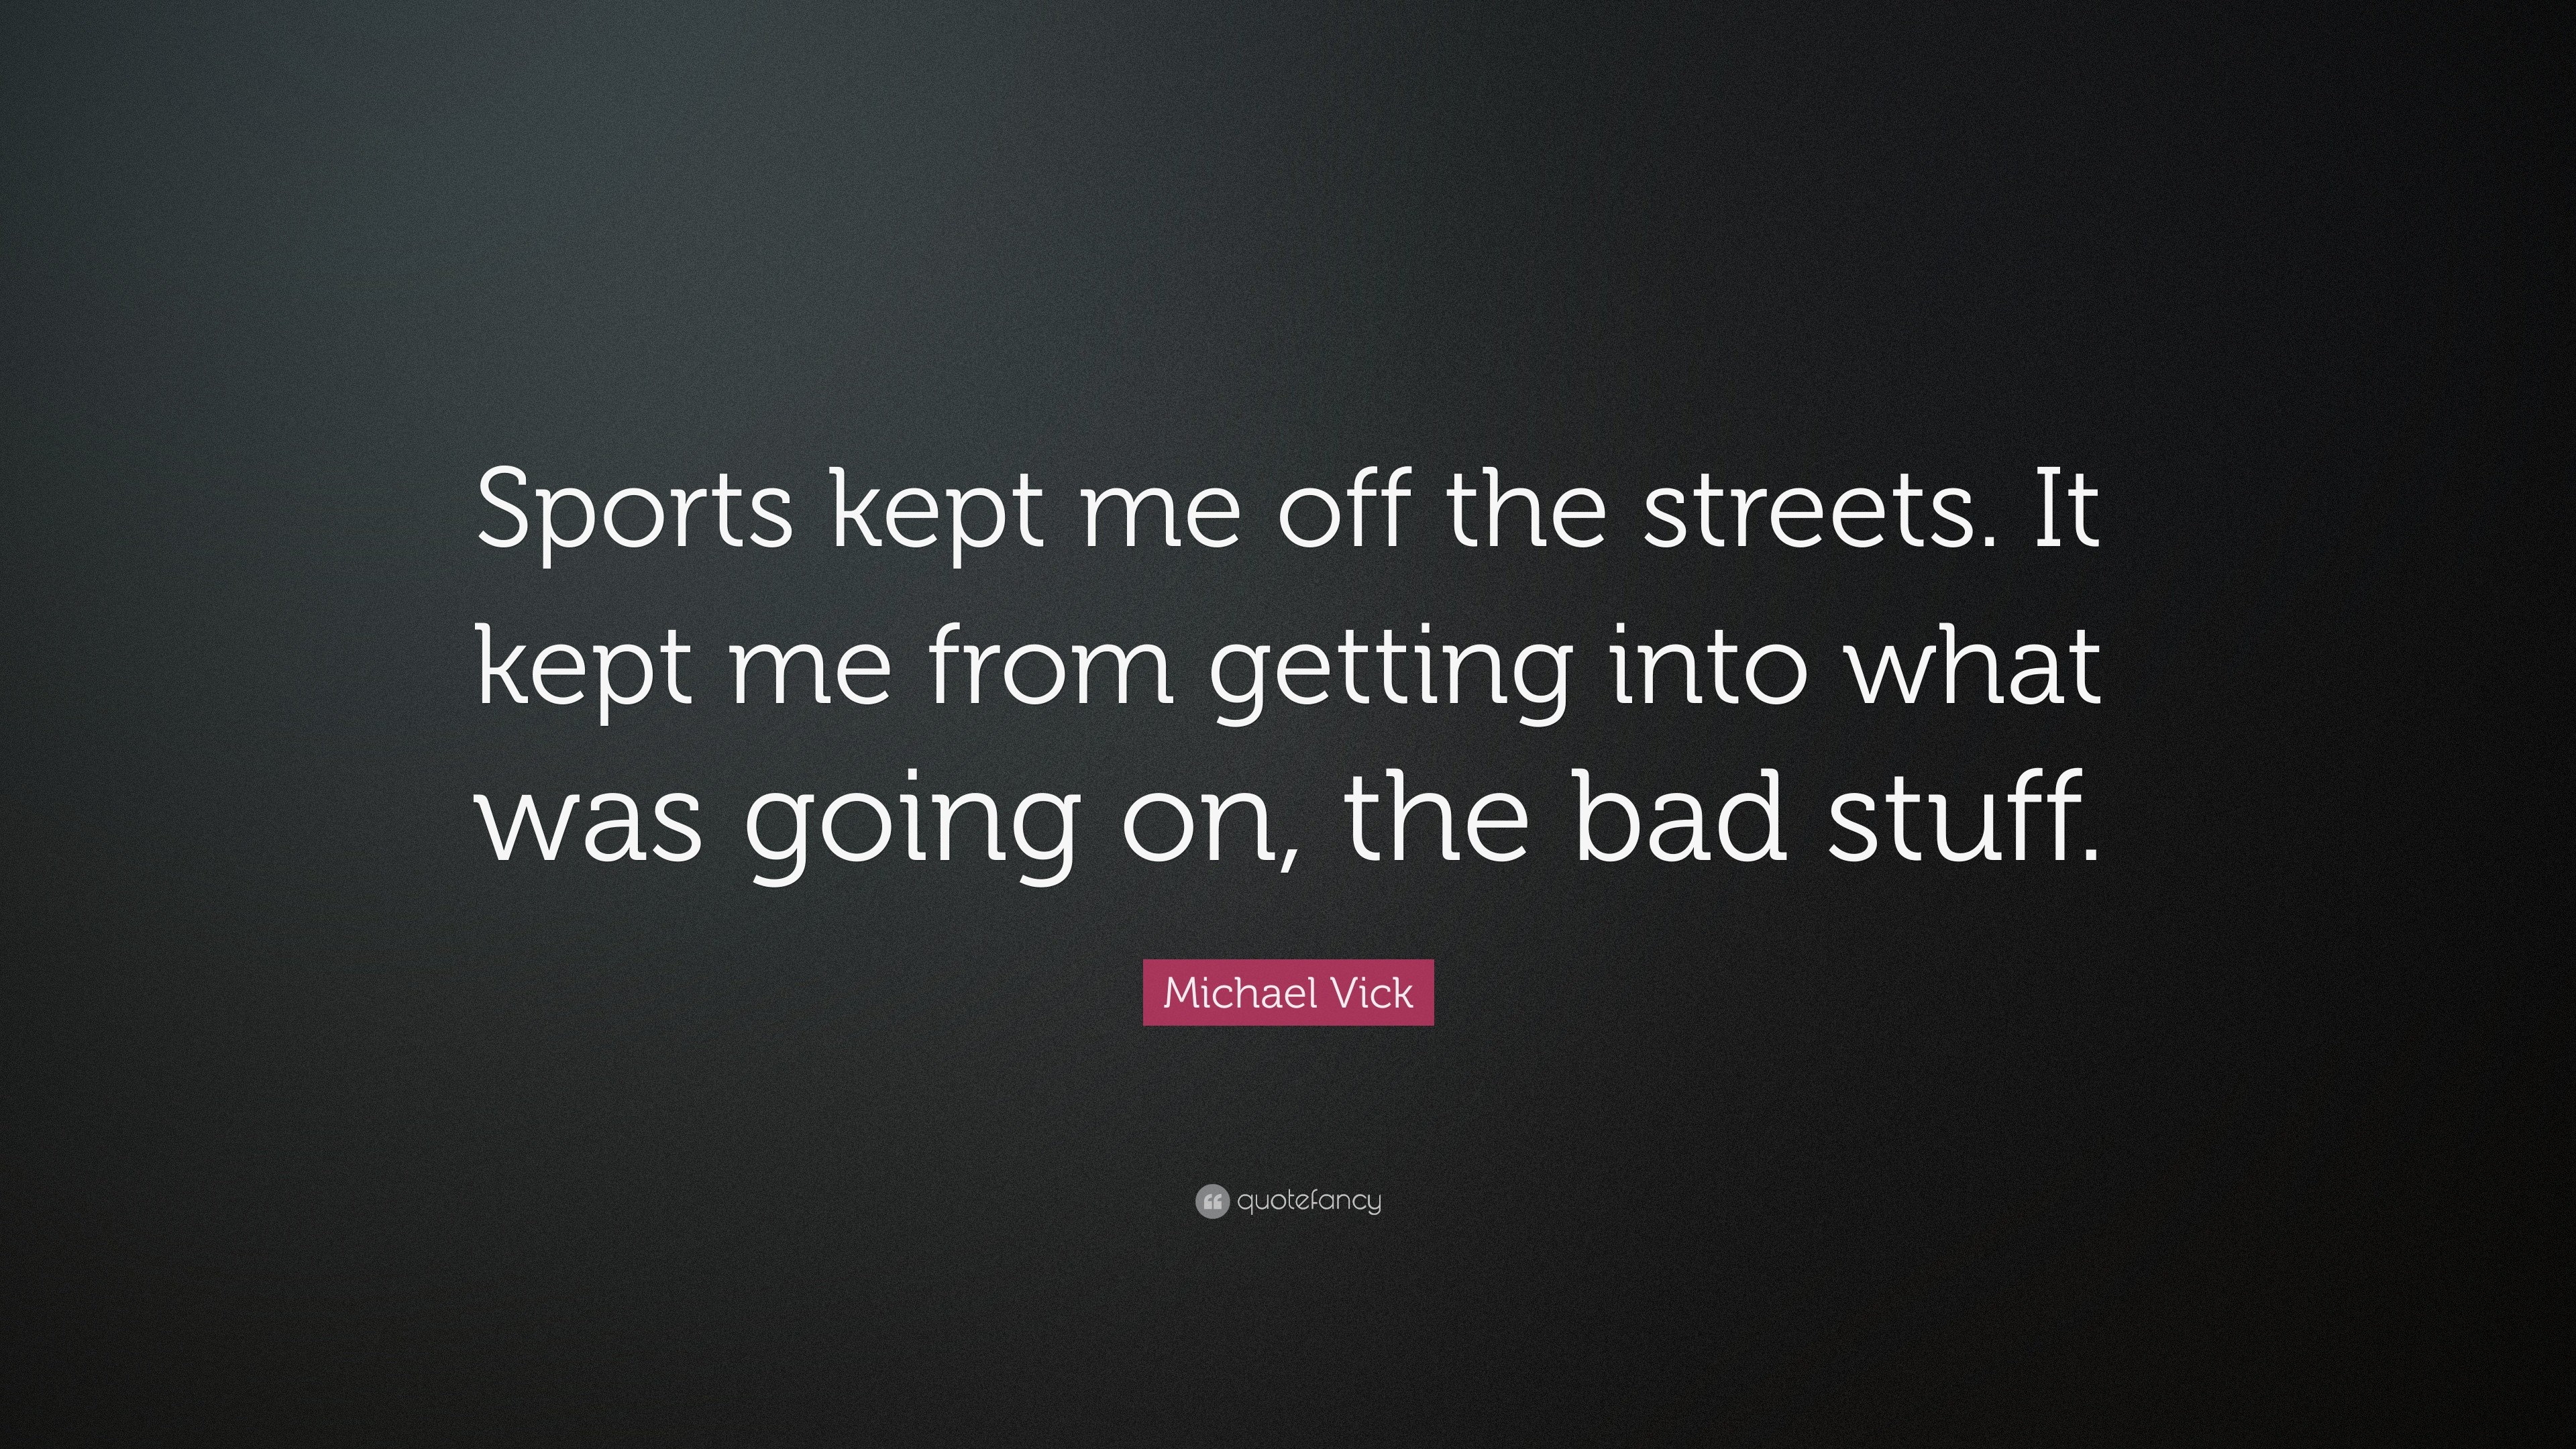 3840x2160 Michael Vick Quote: “Sports kept me off the streets. It kept me from